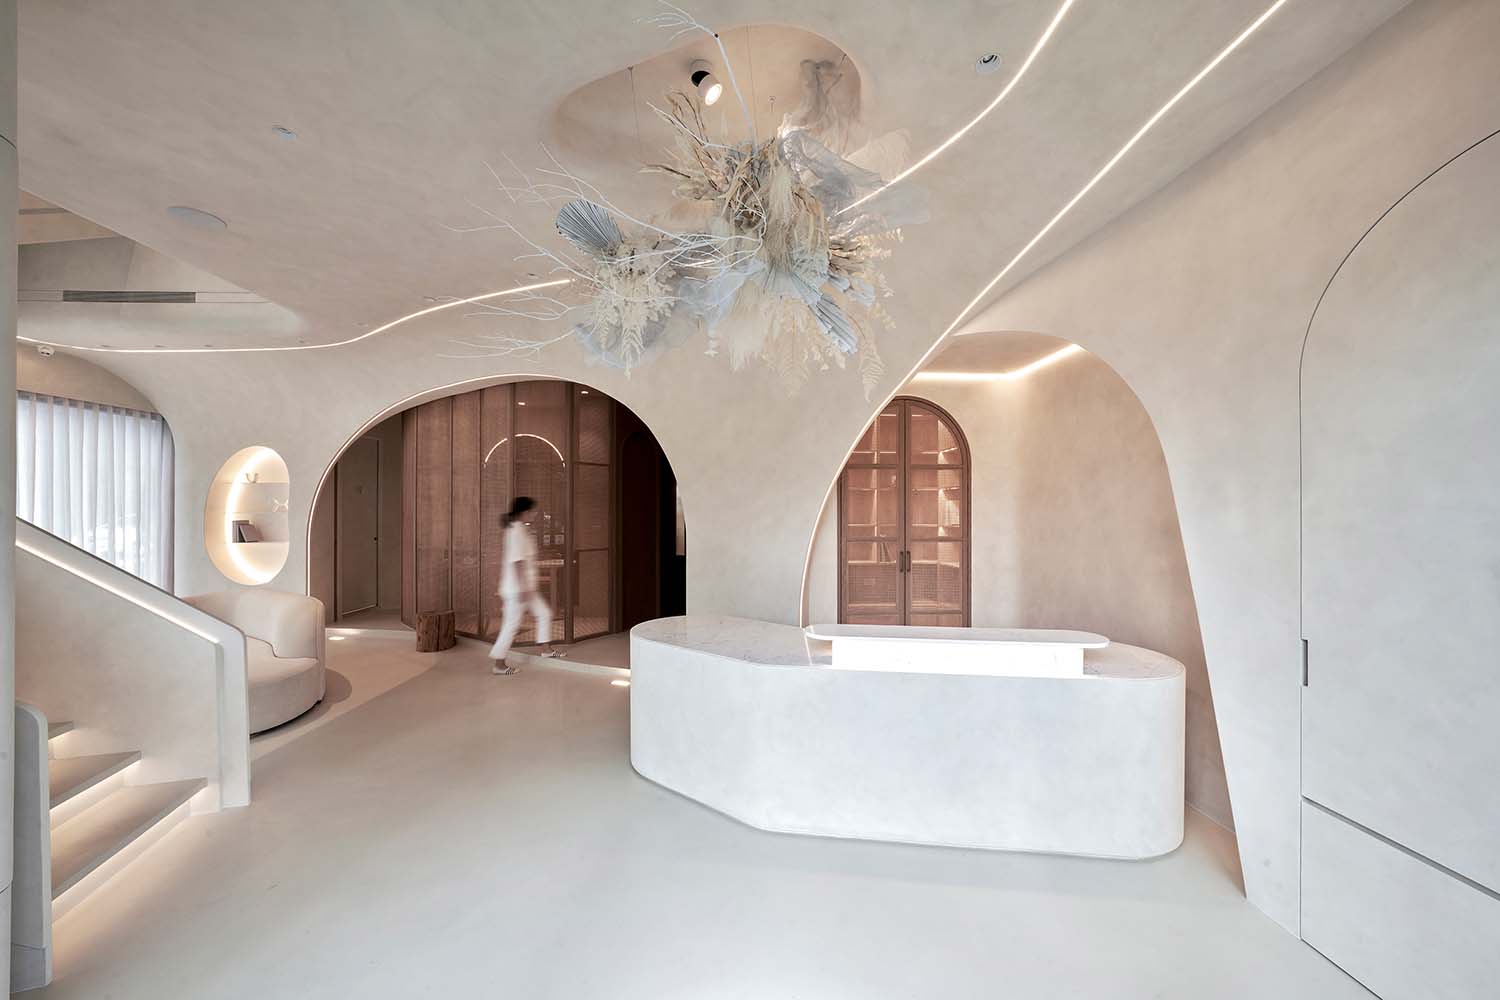 Nest Dental Clinic by Pao-Chieh Chou, Winner in Interior Space and Exhibition Design Category, 2022—2023